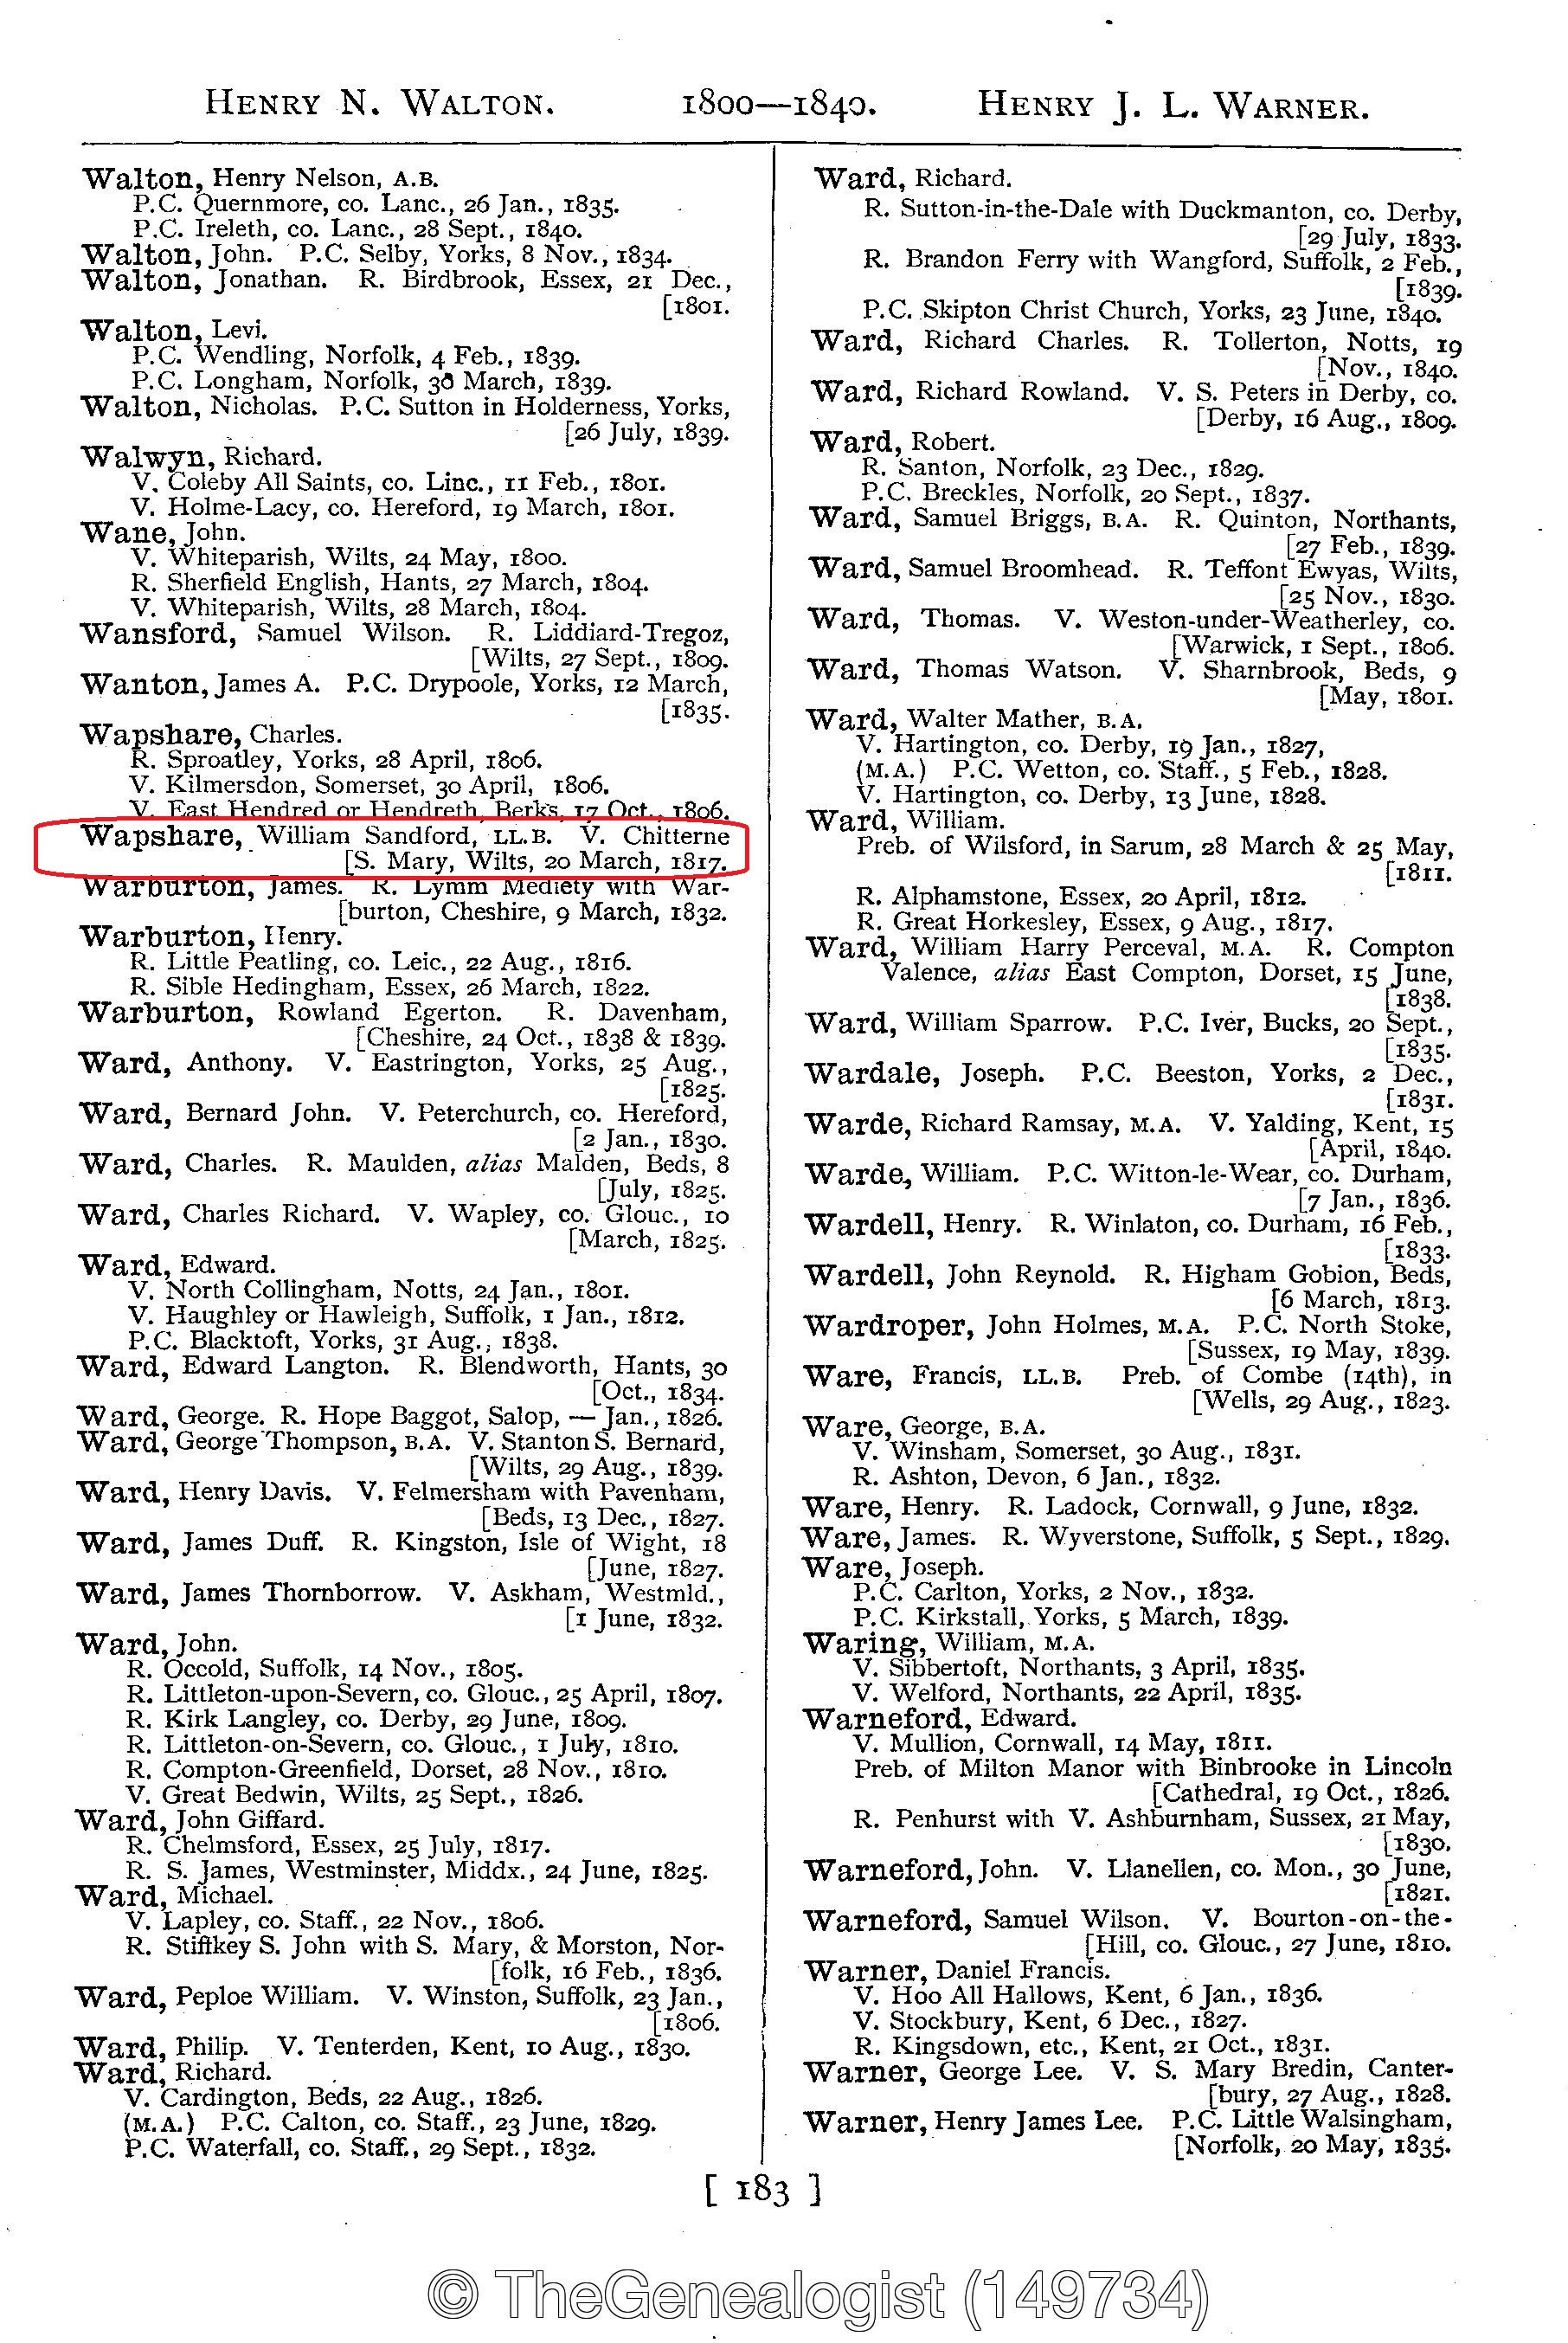 Rev Wapshare in the Index Ecclesiastics 1800-1840 from the Occupational Records on TheGenealogist